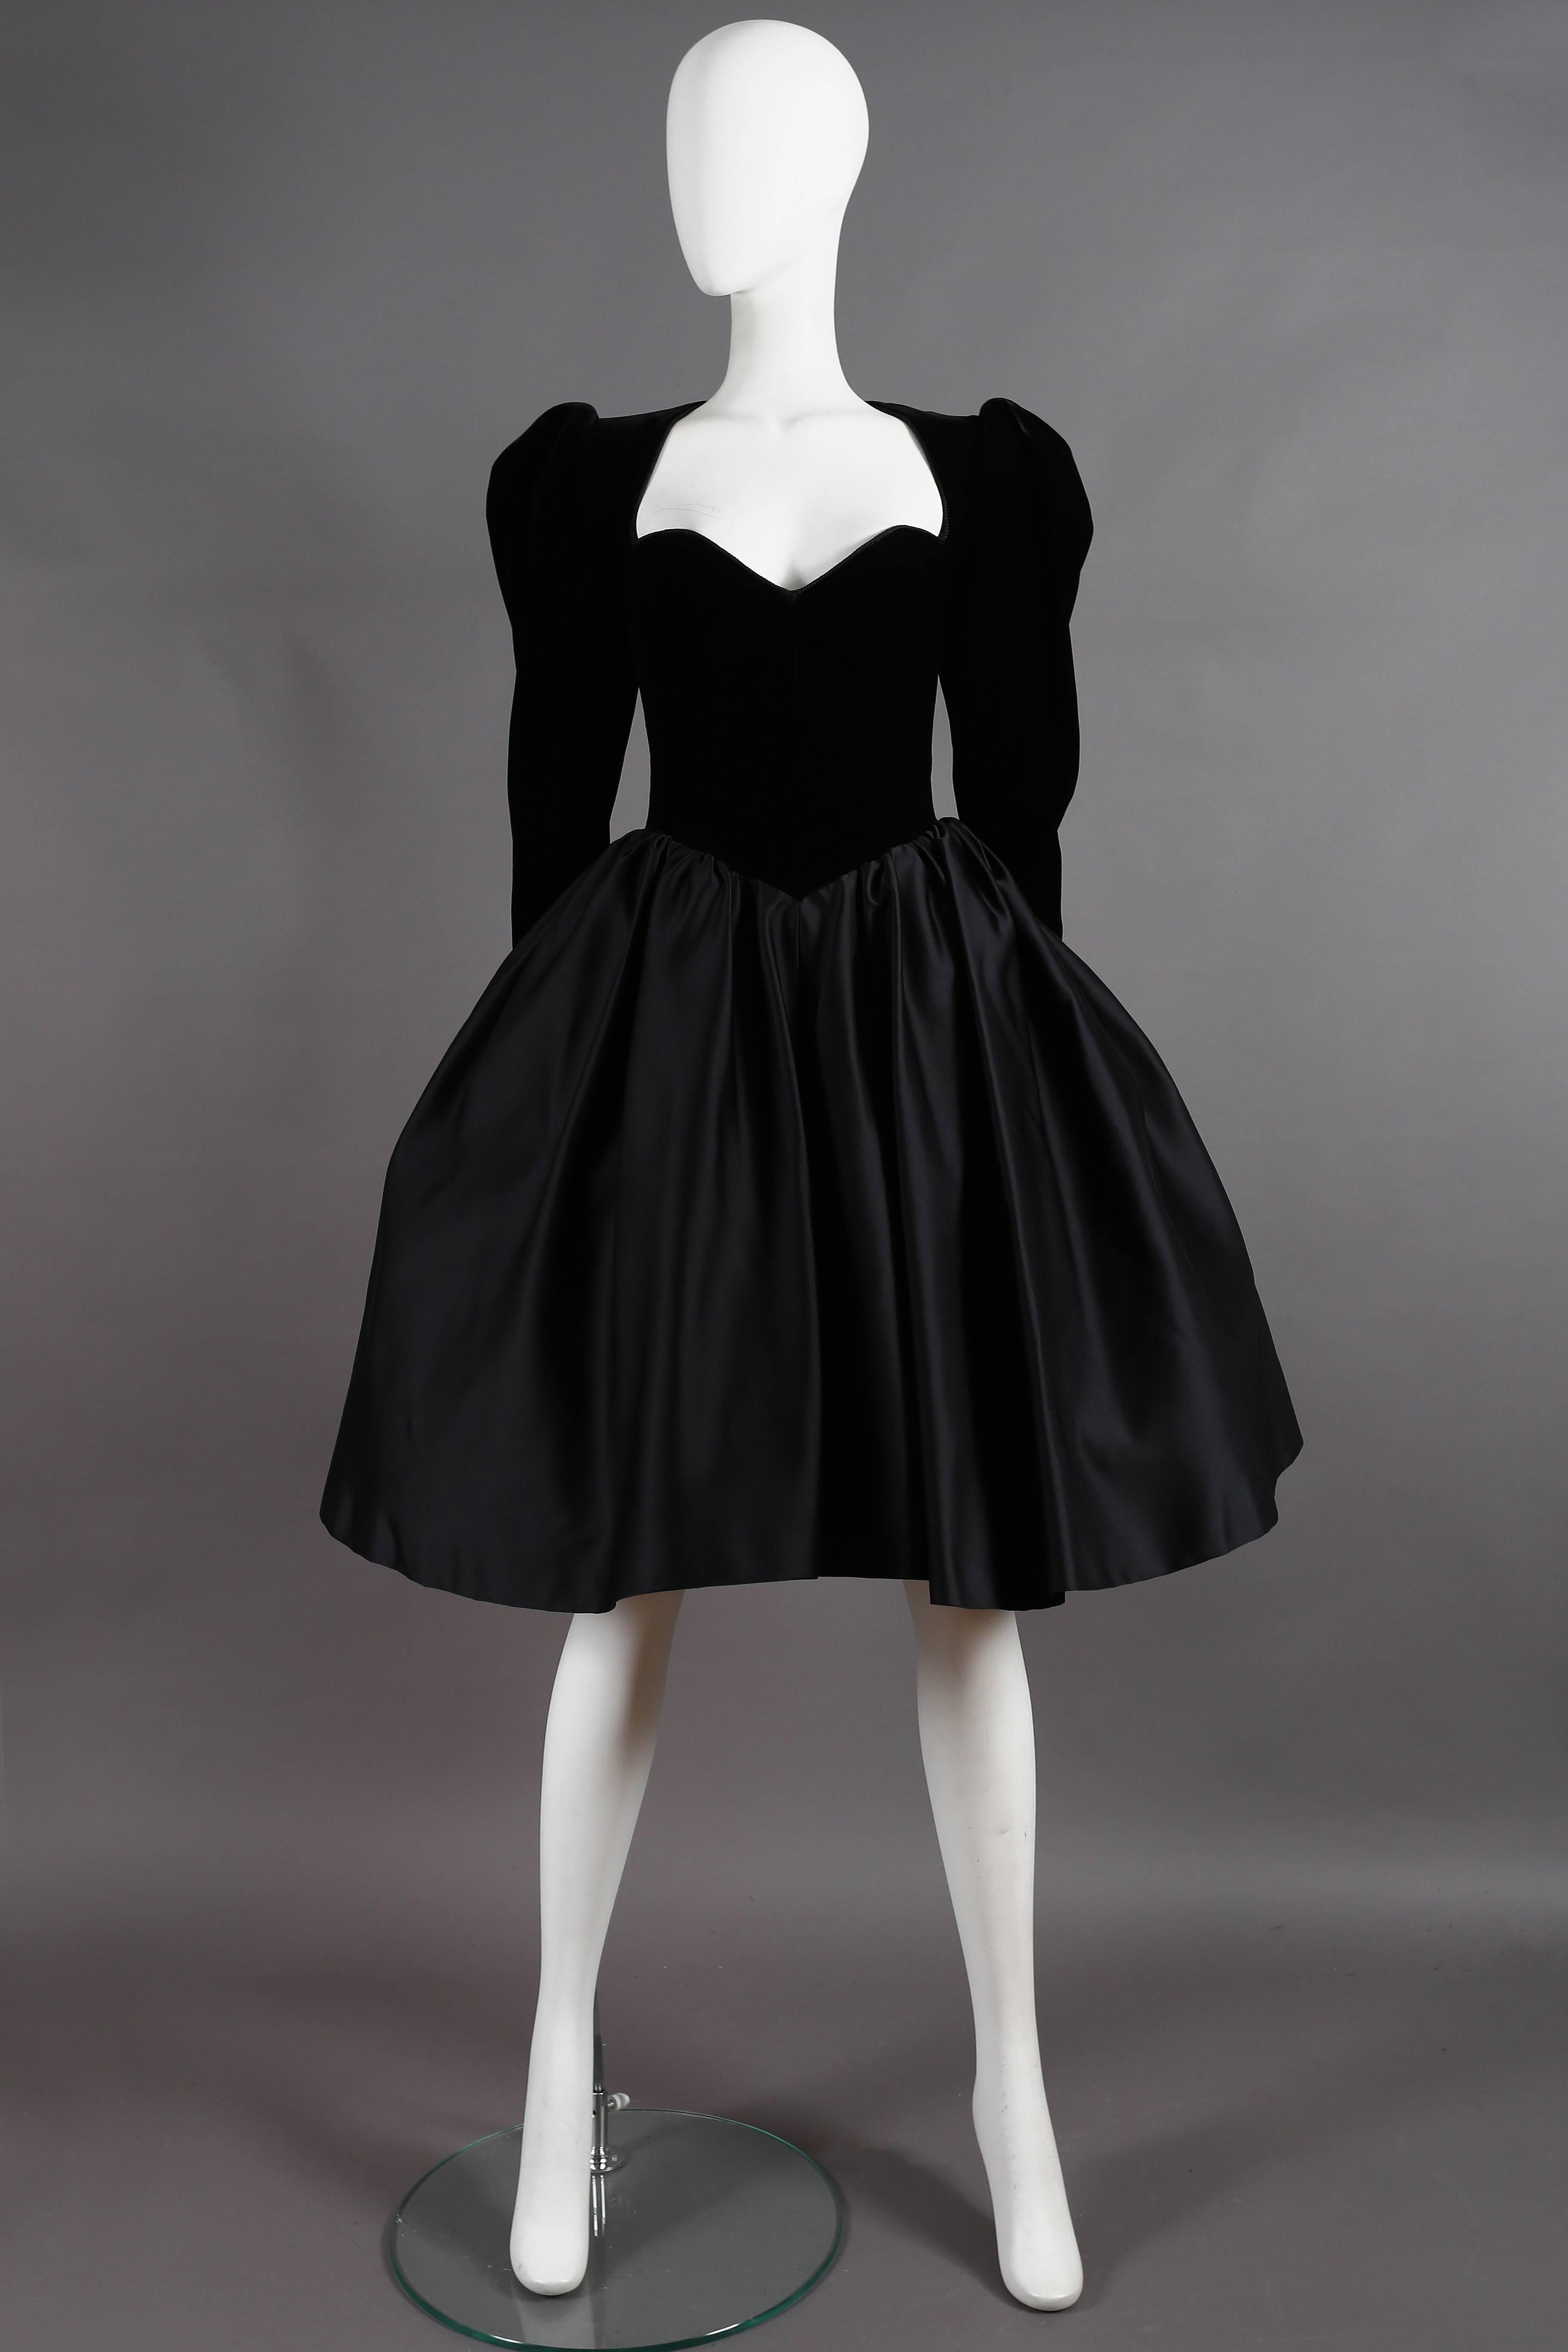 An exquisite Yves Saint Laurent Haute Couture cocktail dress, autumn-winter 1981. The dress features a low-cut black velvet bodice with a braided trim, puff shoulders, and metal zip fastenings. The skirt is pleated from the synched in waist with